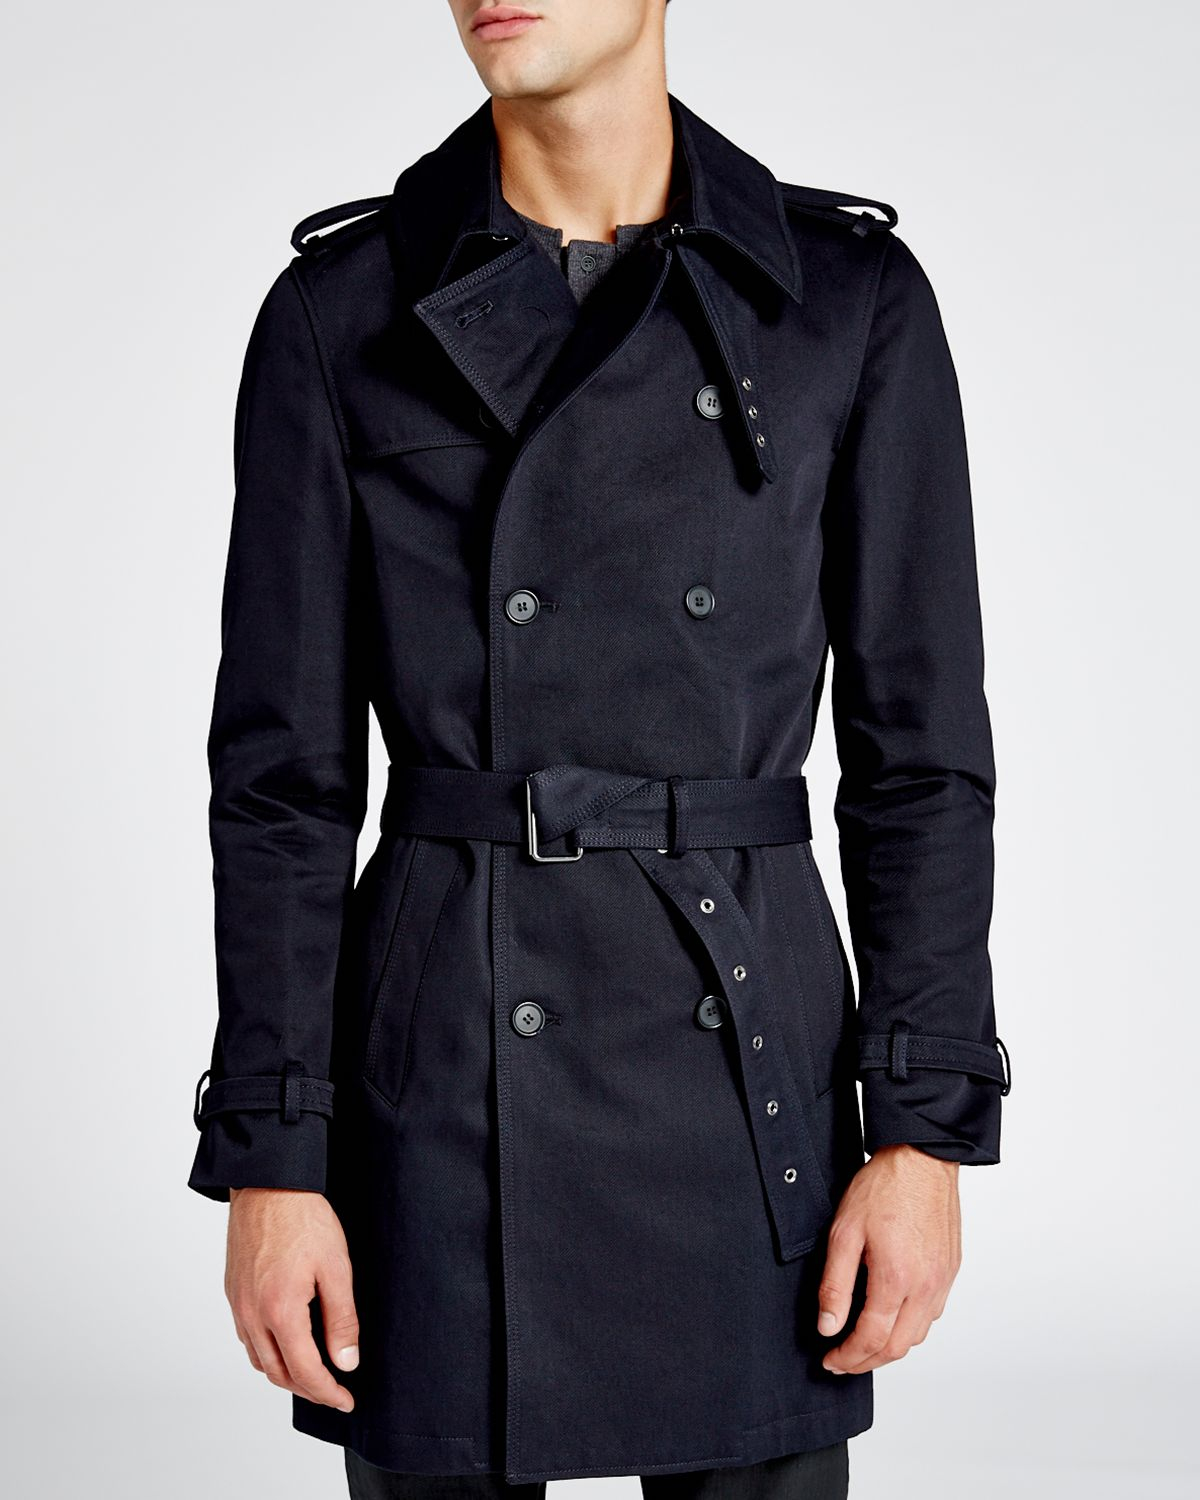 Lyst - The Kooples Trench Coat in Blue for Men